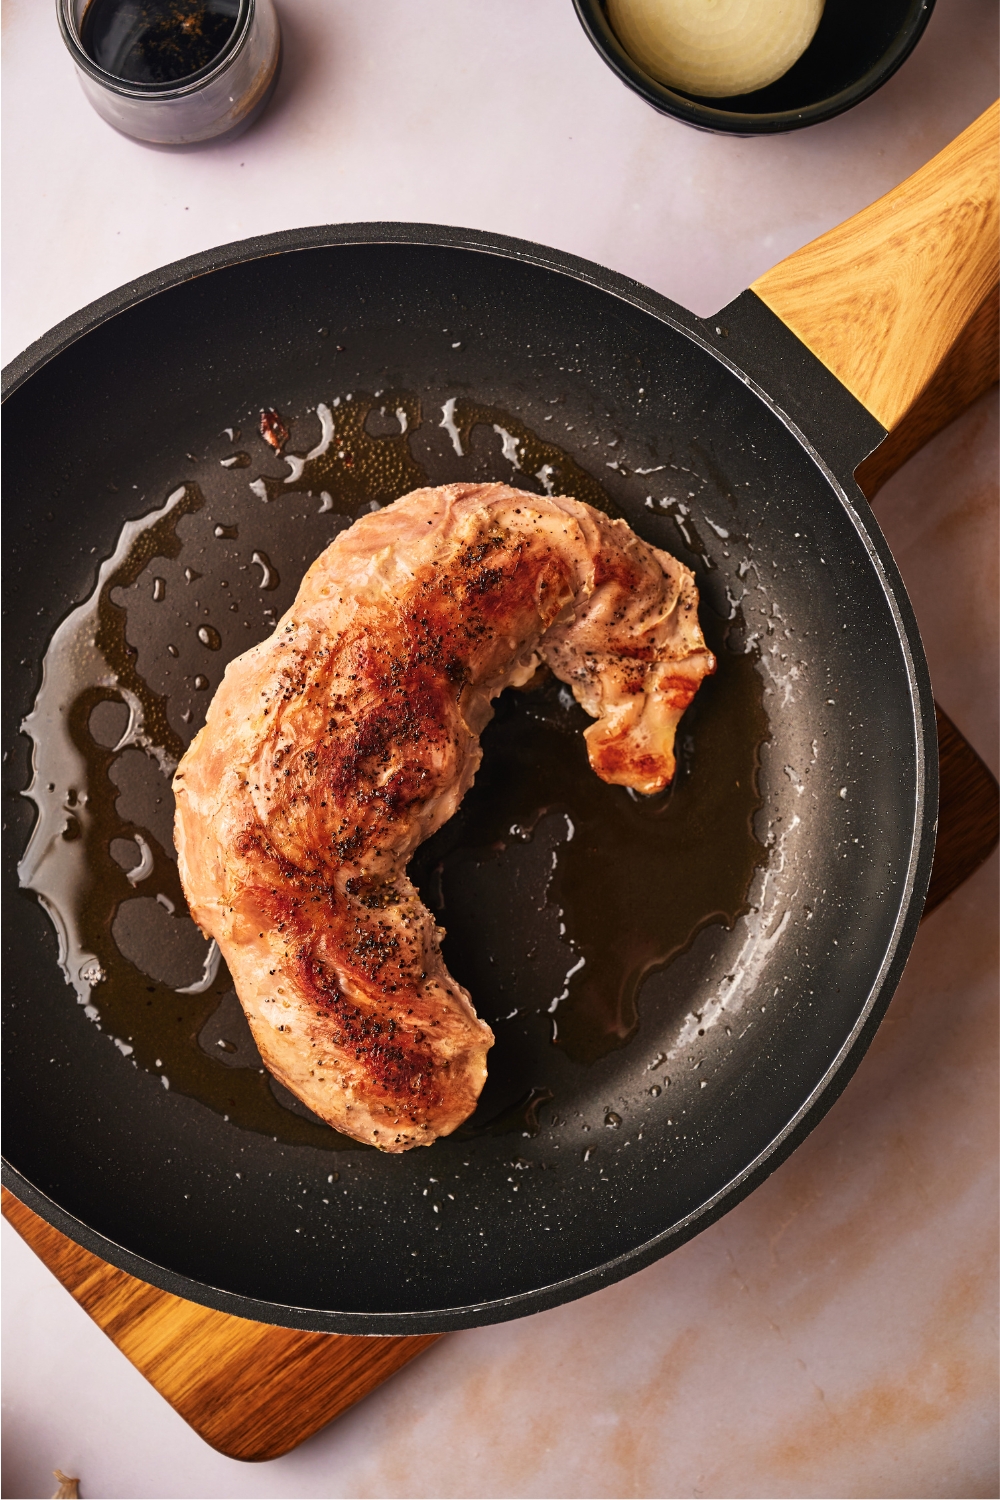 A cooked pork tenderloin being seared in a black skillet.